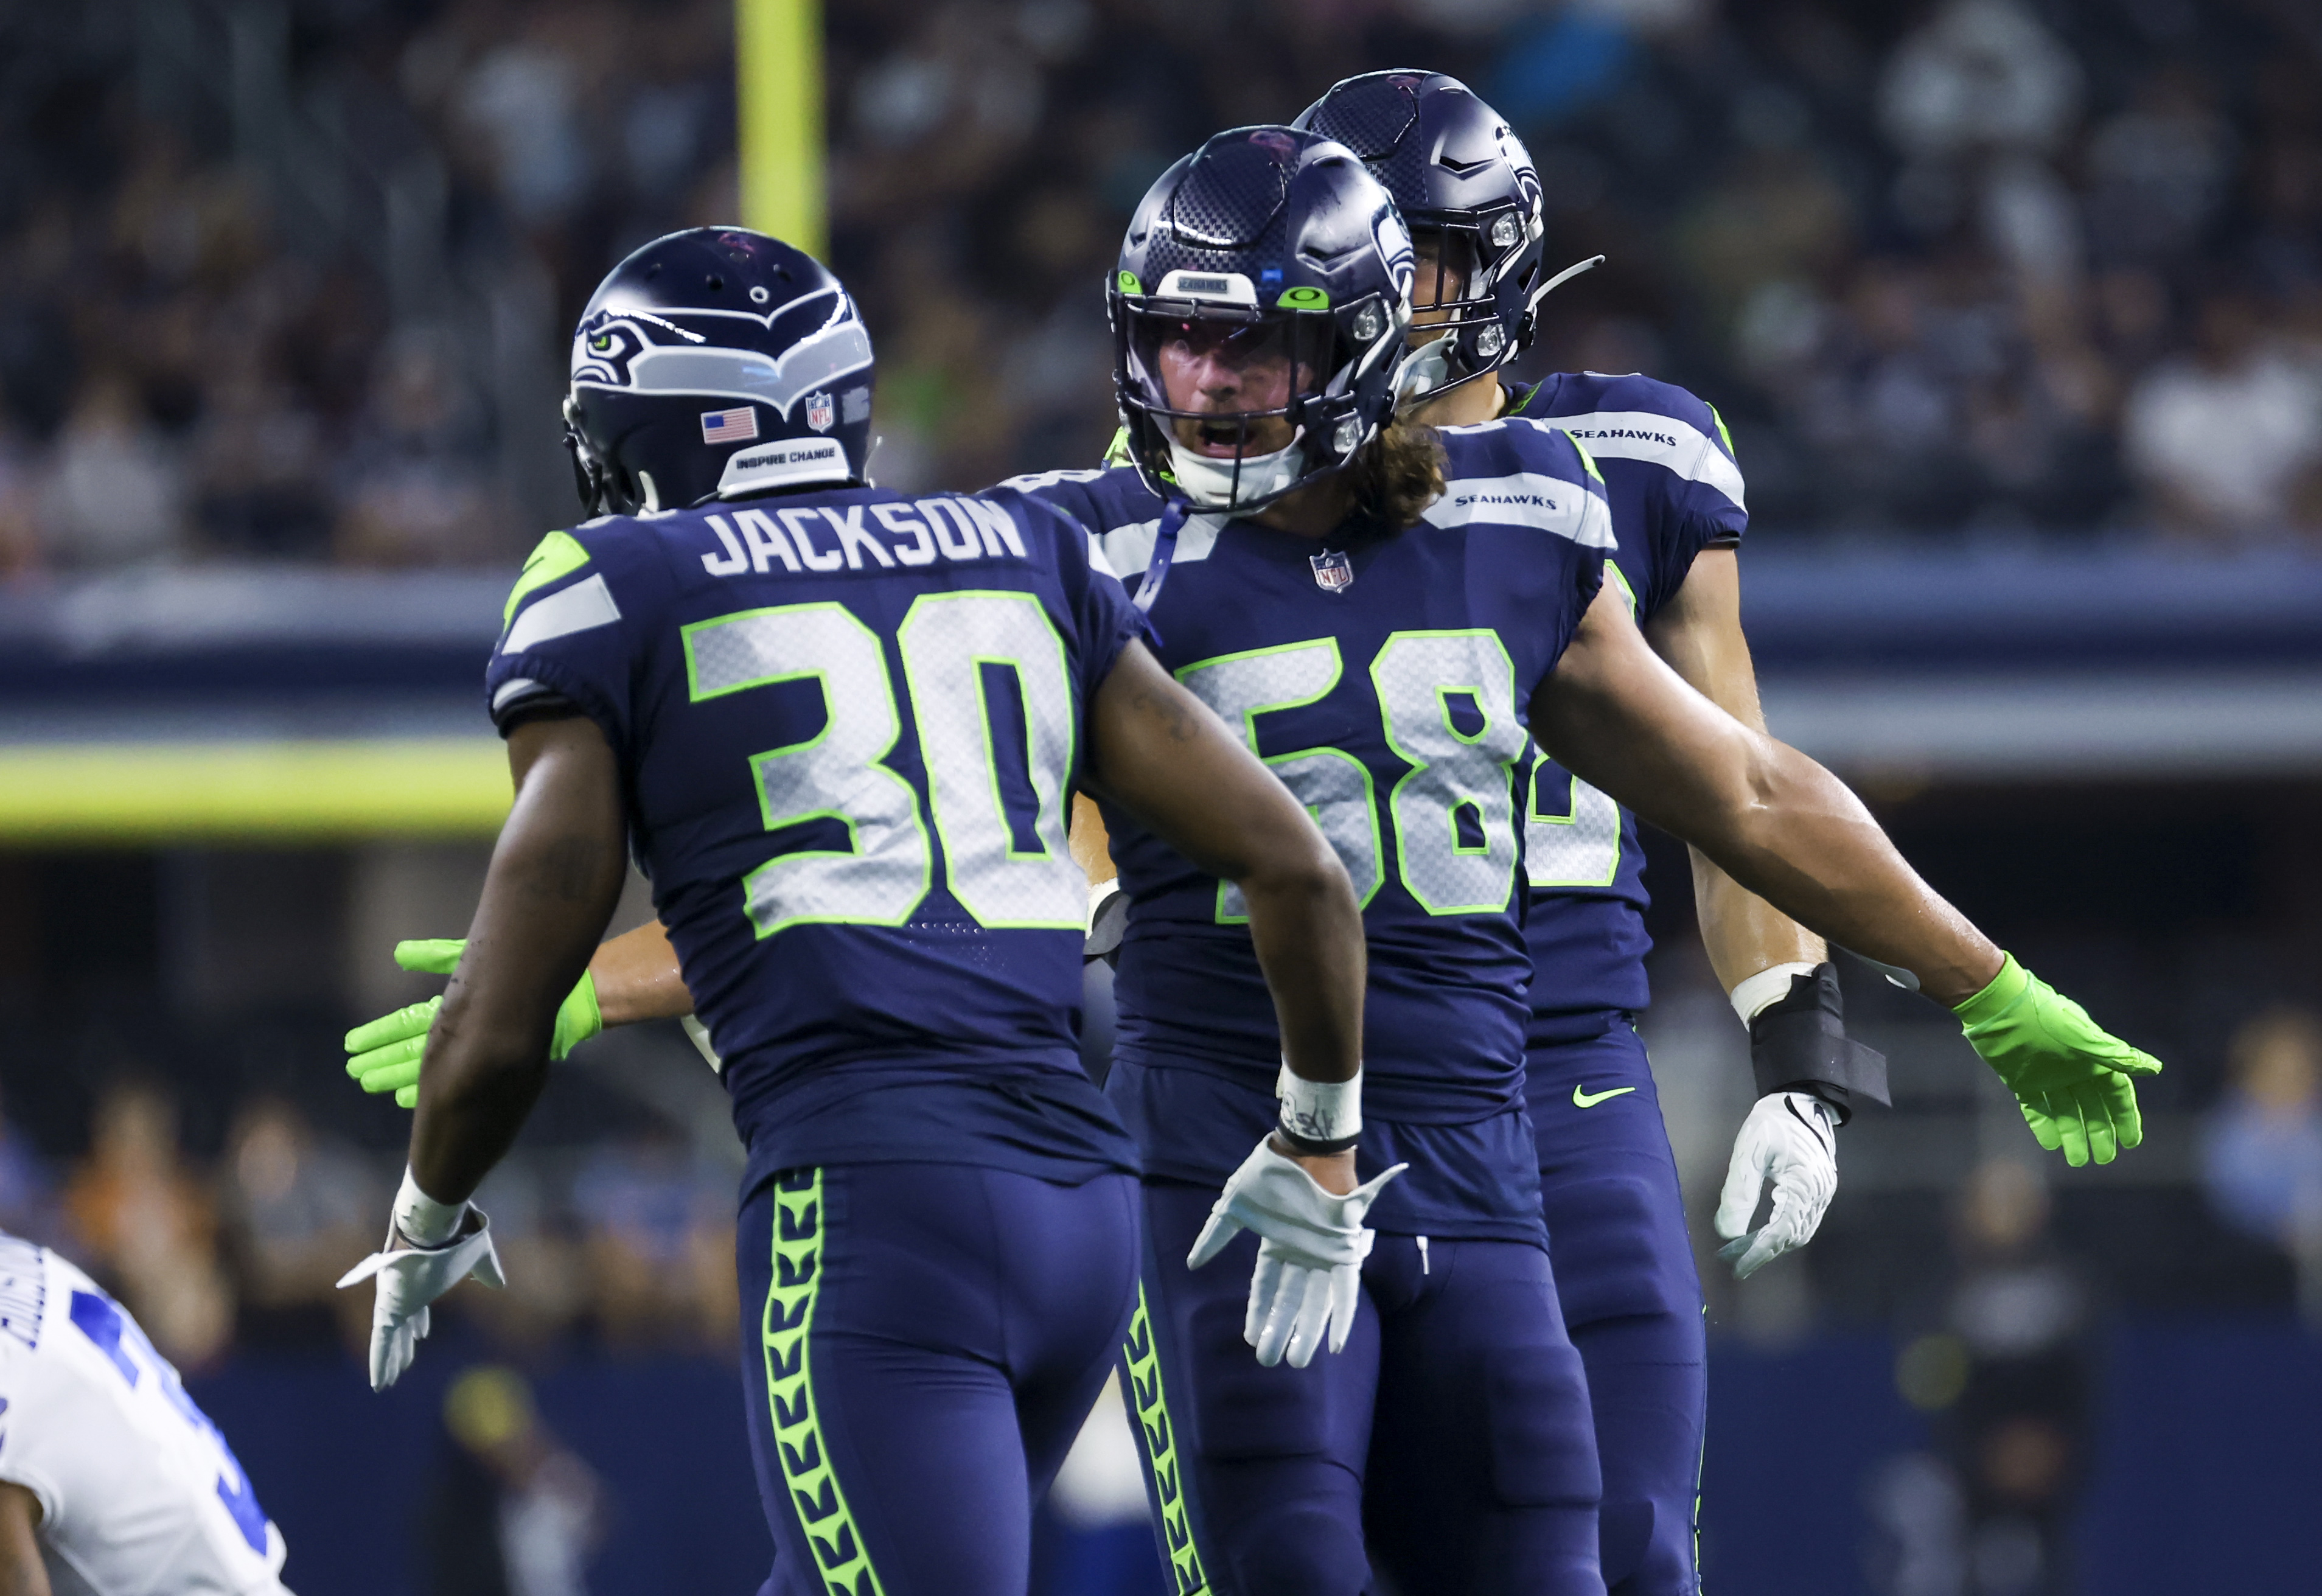 Seahawks Confident in ‘Prepared’ LB Tanner Muse in First Start vs. Rams